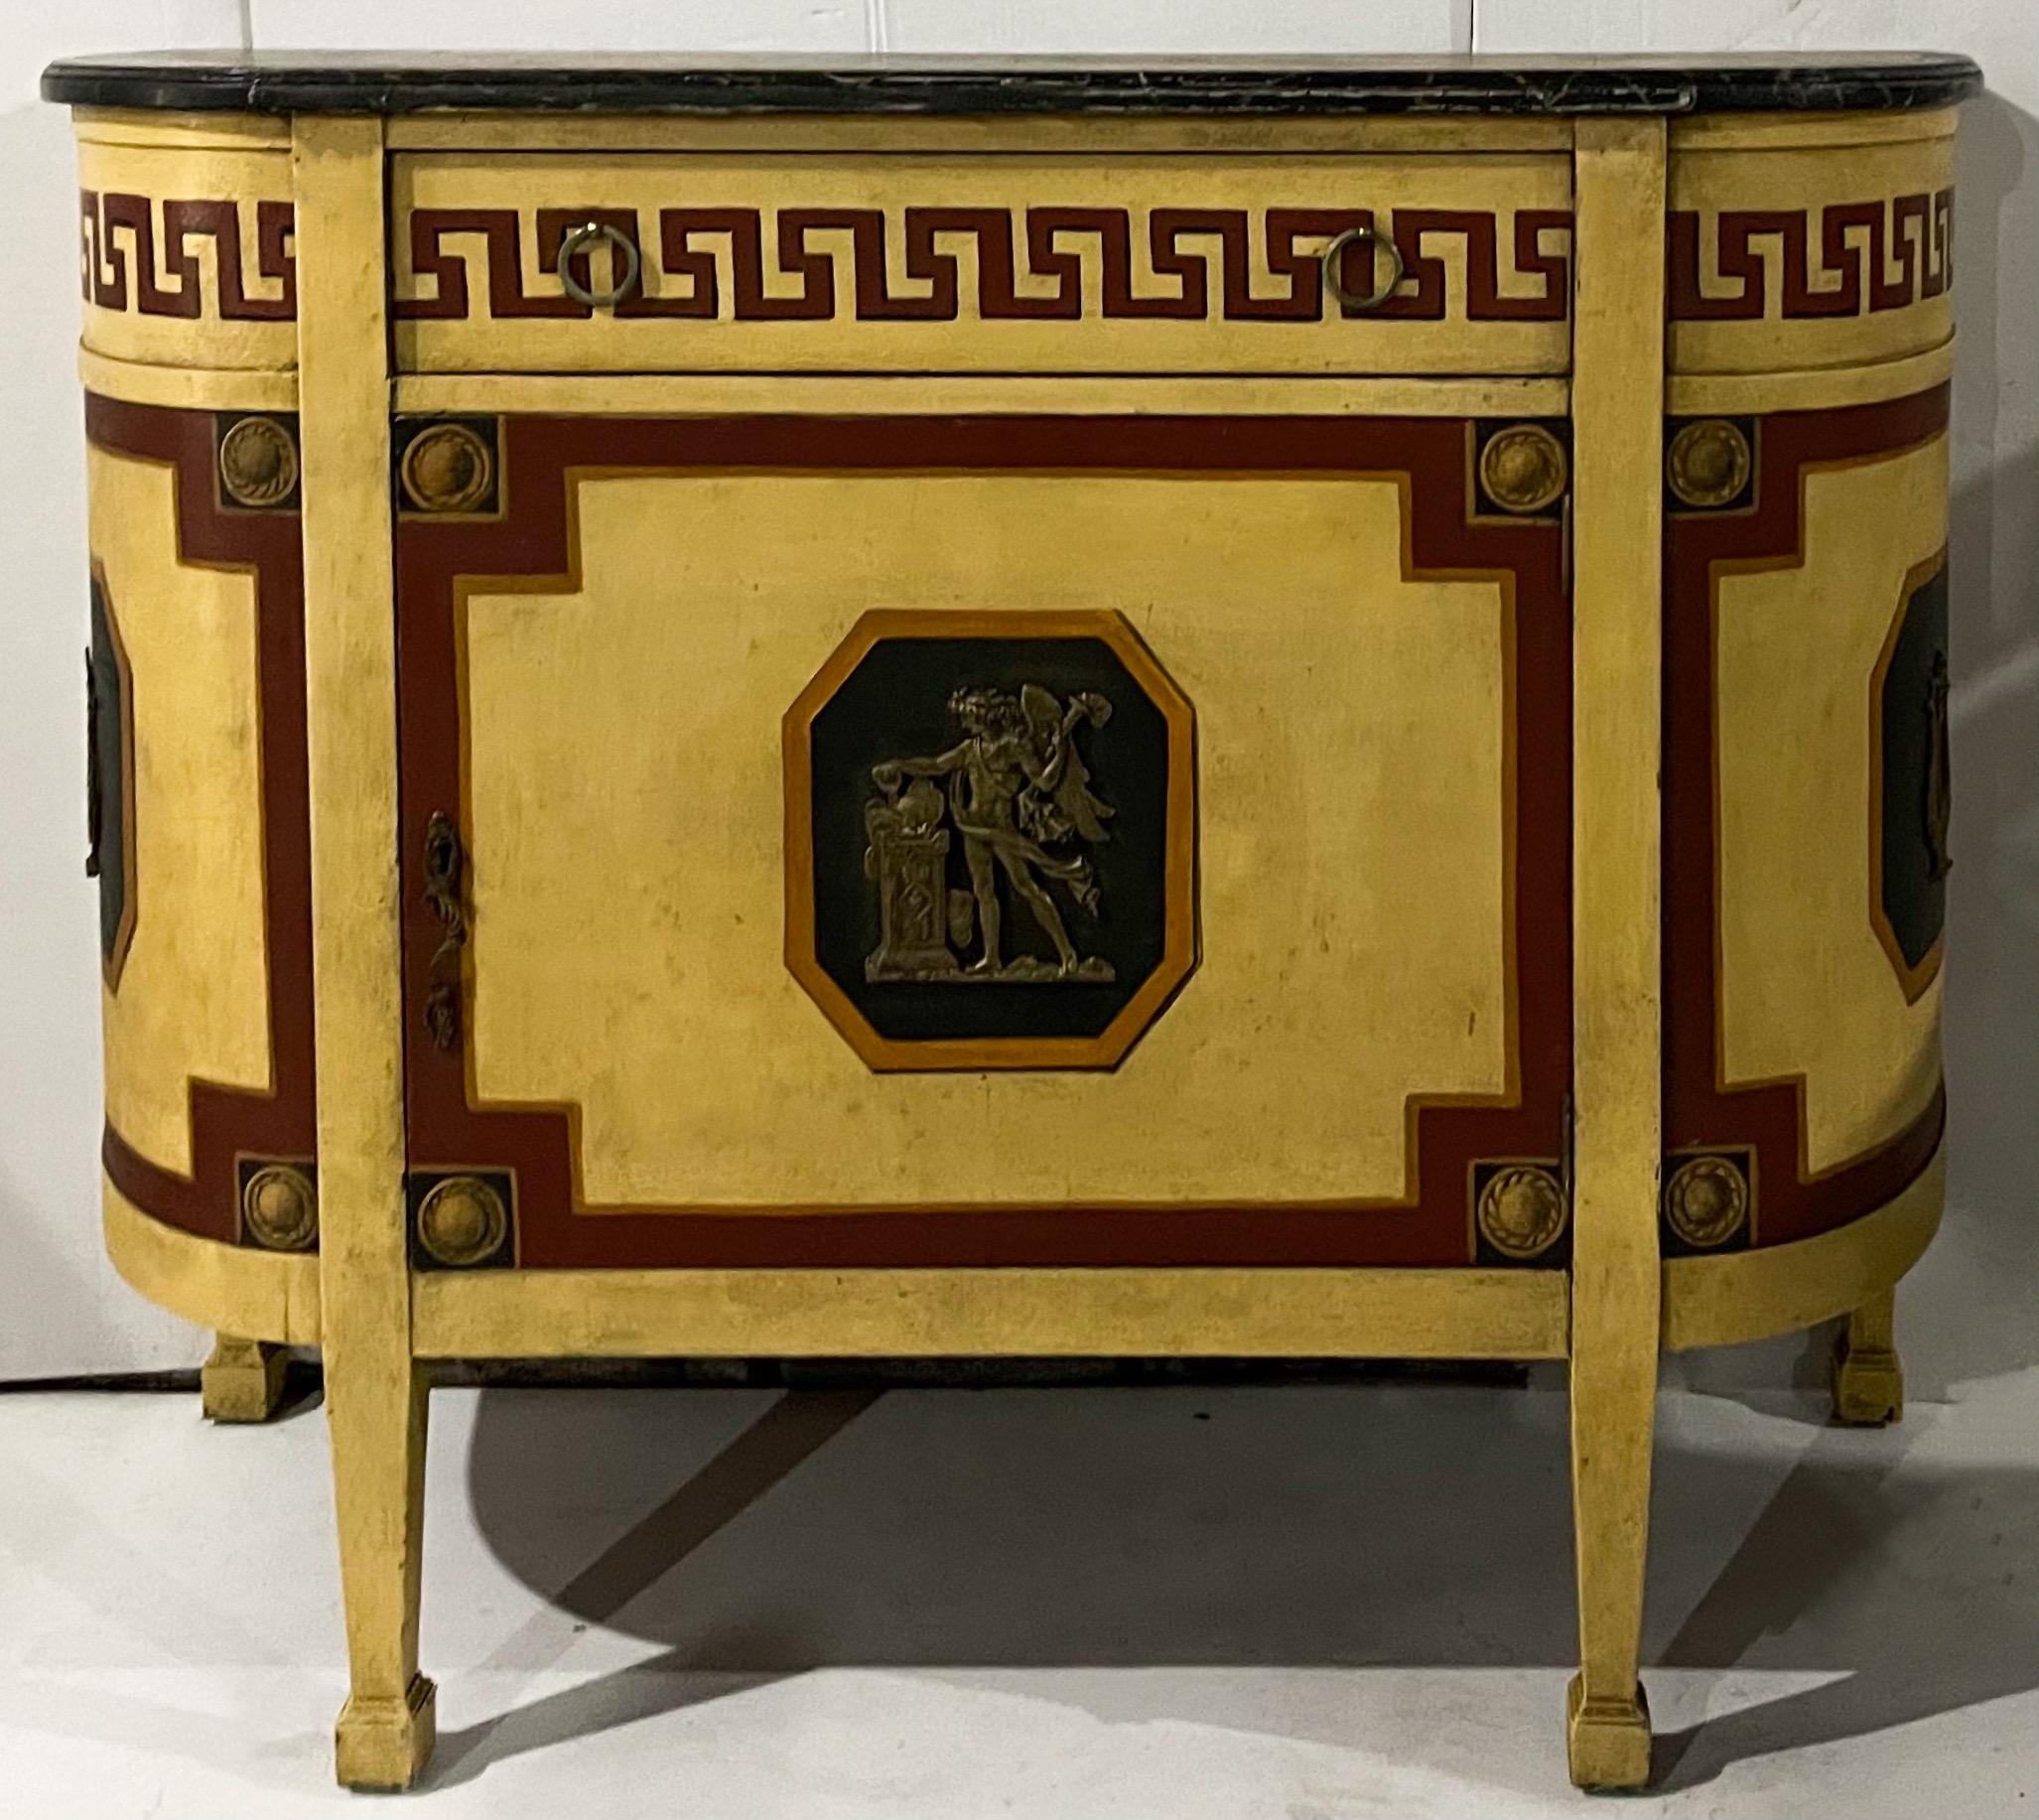 This is a show stopper! It is an early 20th century Italian neo-classical style faux marble painted demilune cabinet. The coloration is wonderful with garnet Greek Key accents and black and gold Greco-Roman figures. It is unmarked.